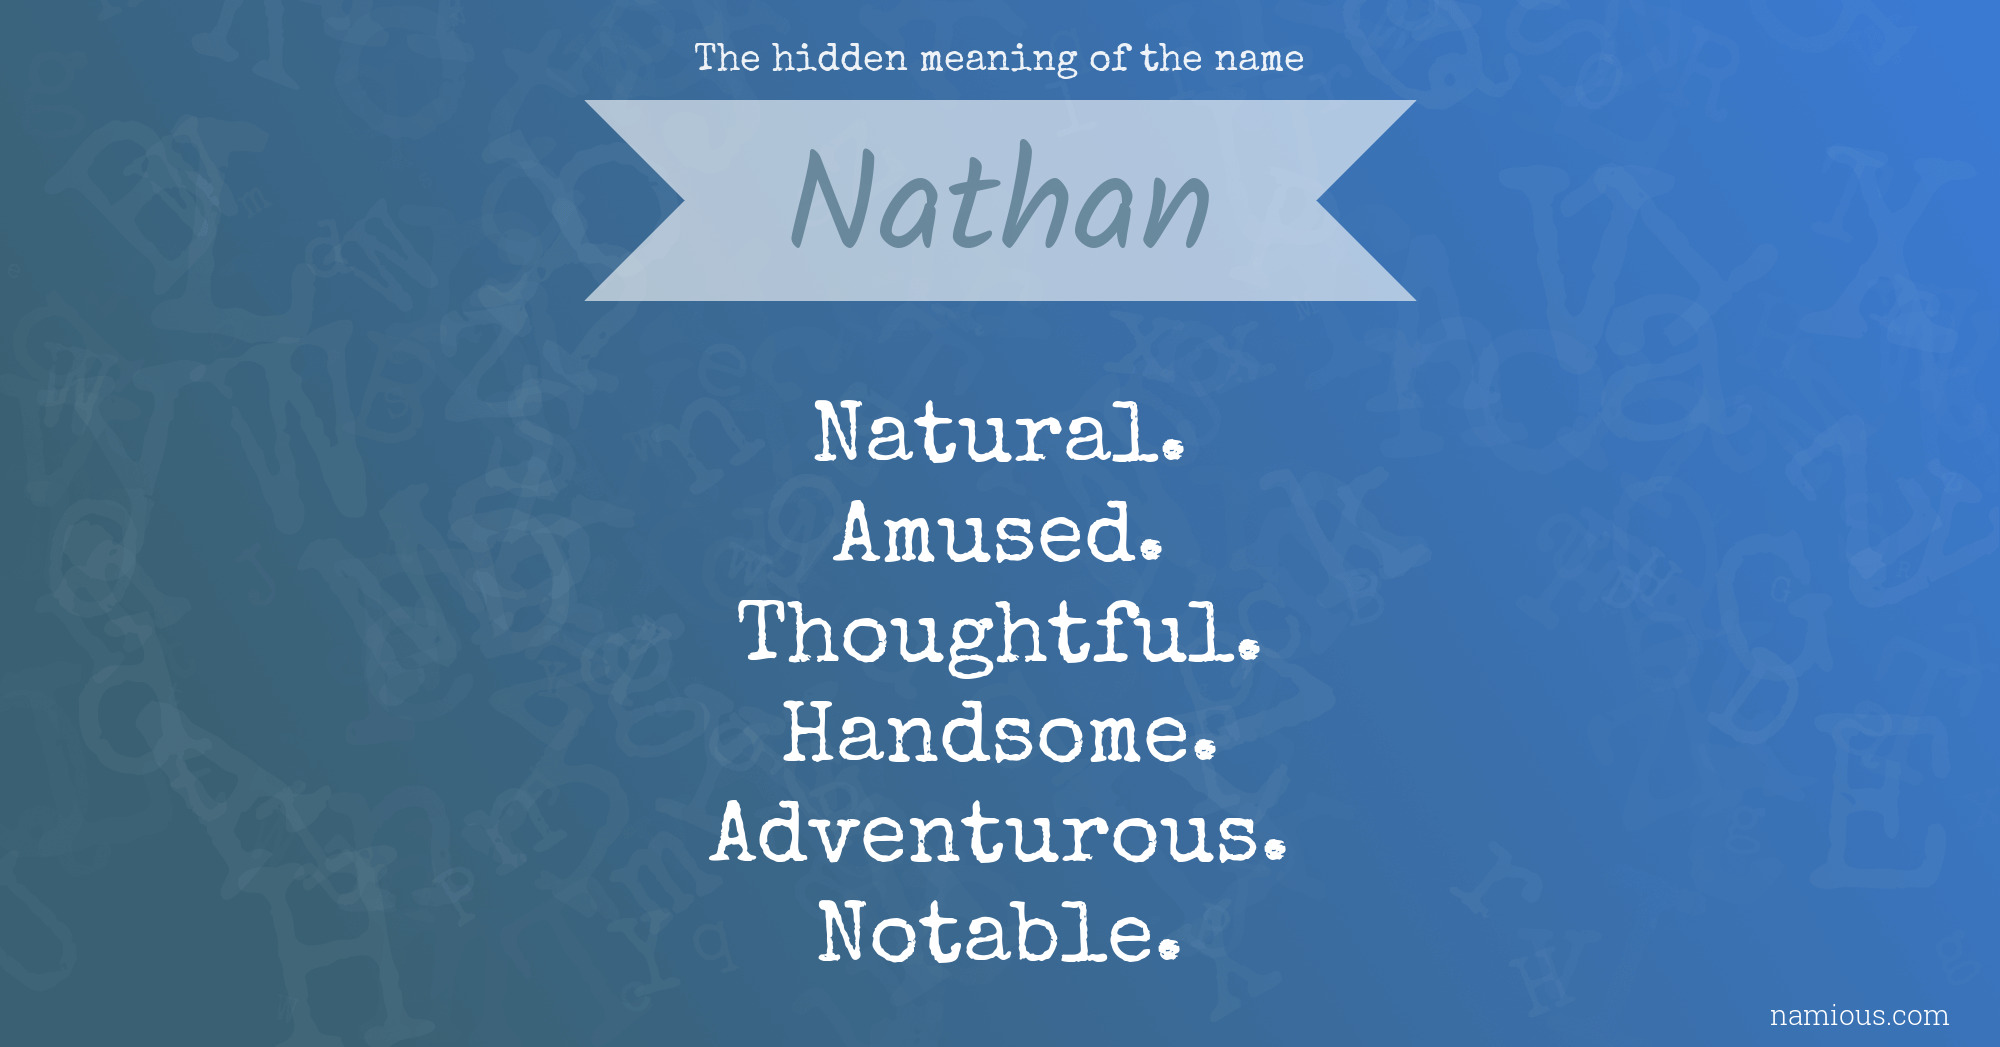 The hidden meaning of the name Nathan